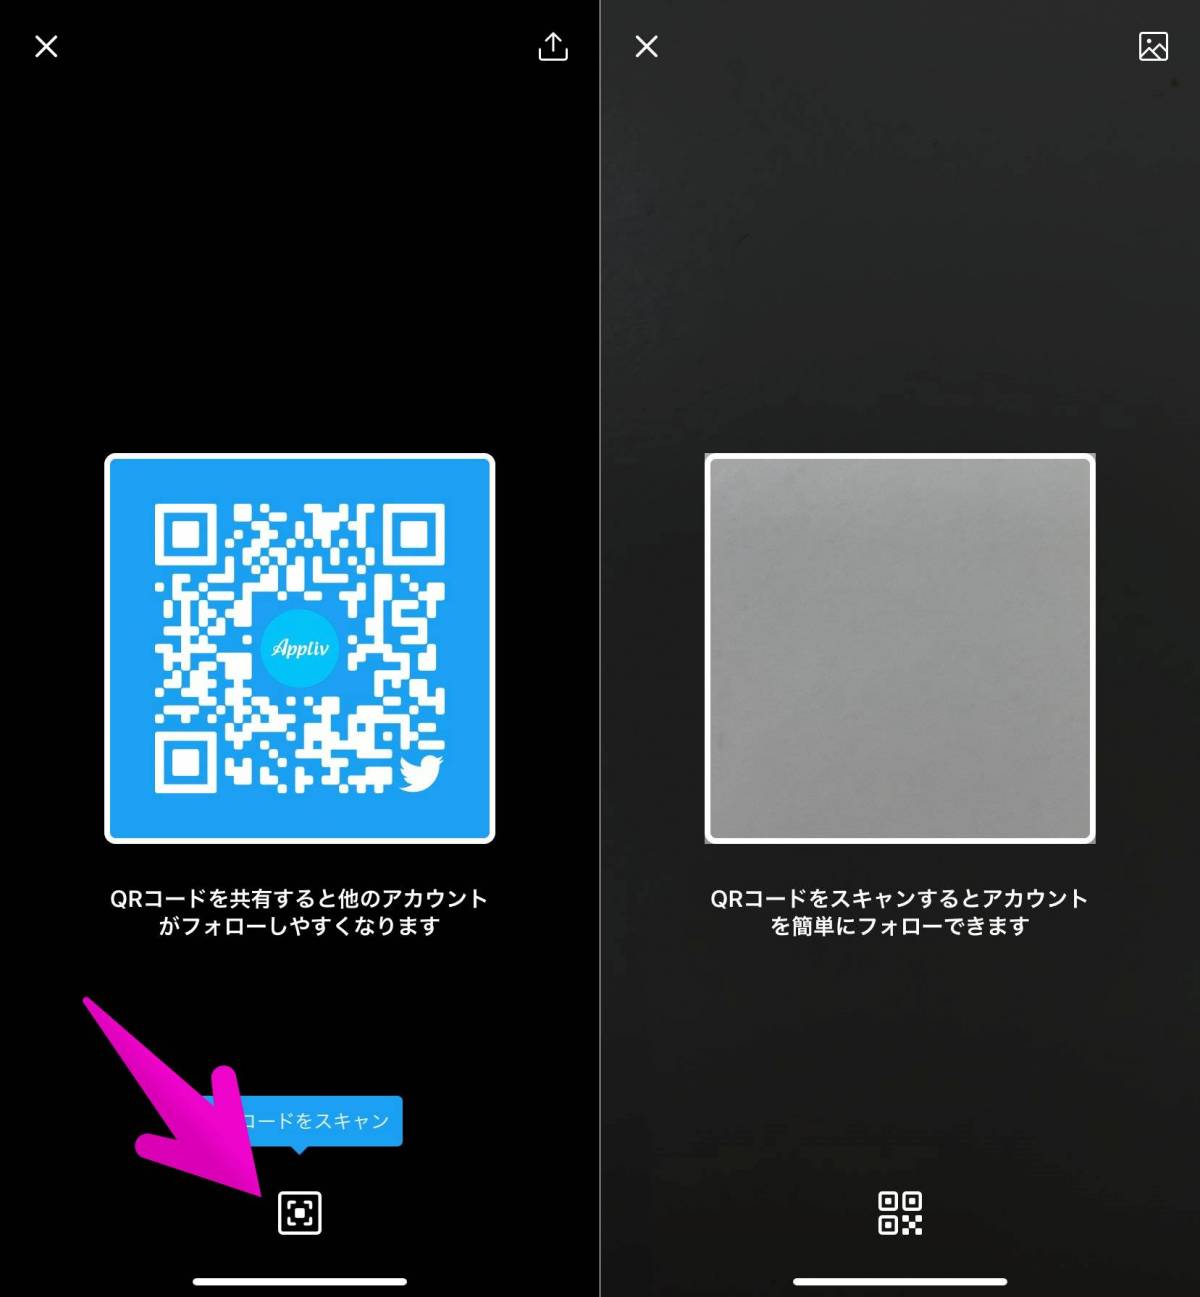 Twitterのqrコードを表示する方法 読み取り方 Iphone Android Appliv Topics